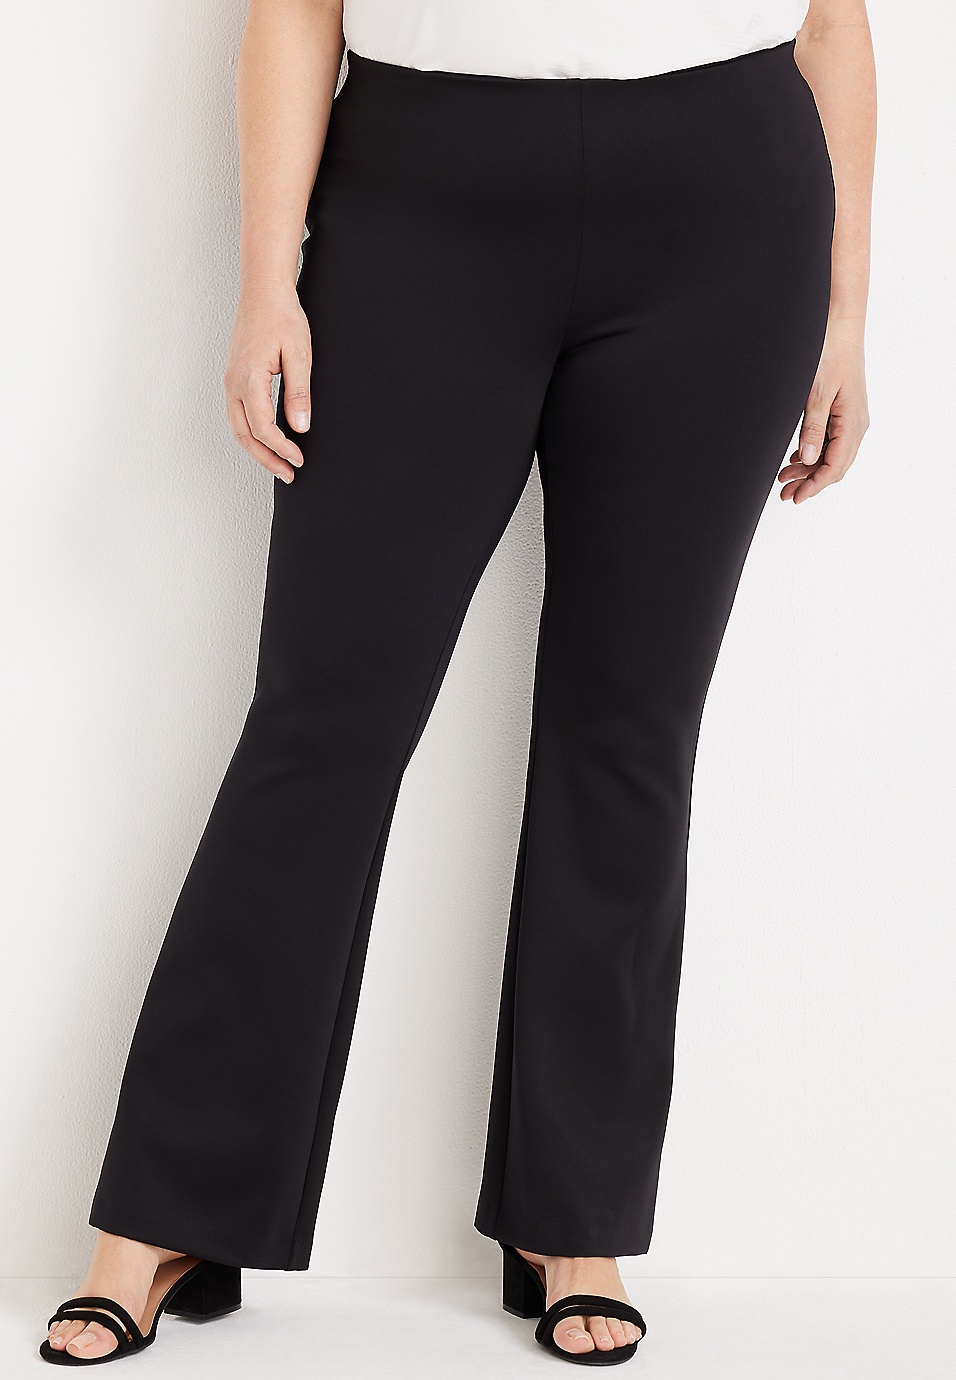 Solid Flared Ponte Pants for Women, Black